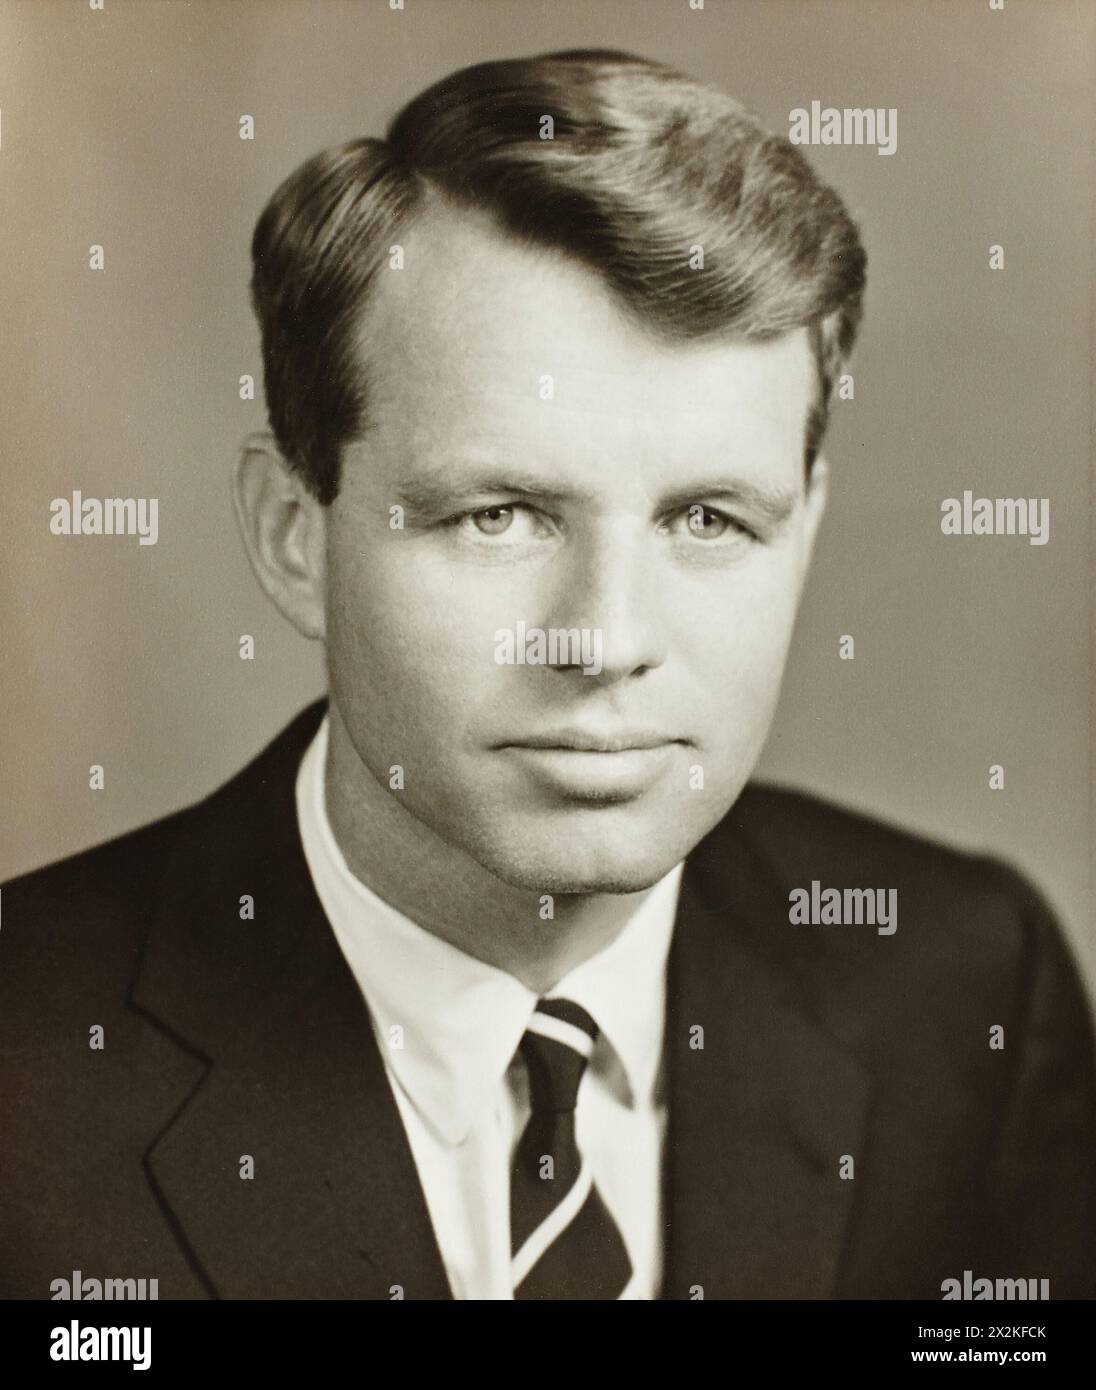 Early portraif of Robert F. Kennedy - Attorney General, 1961 Stock Photo